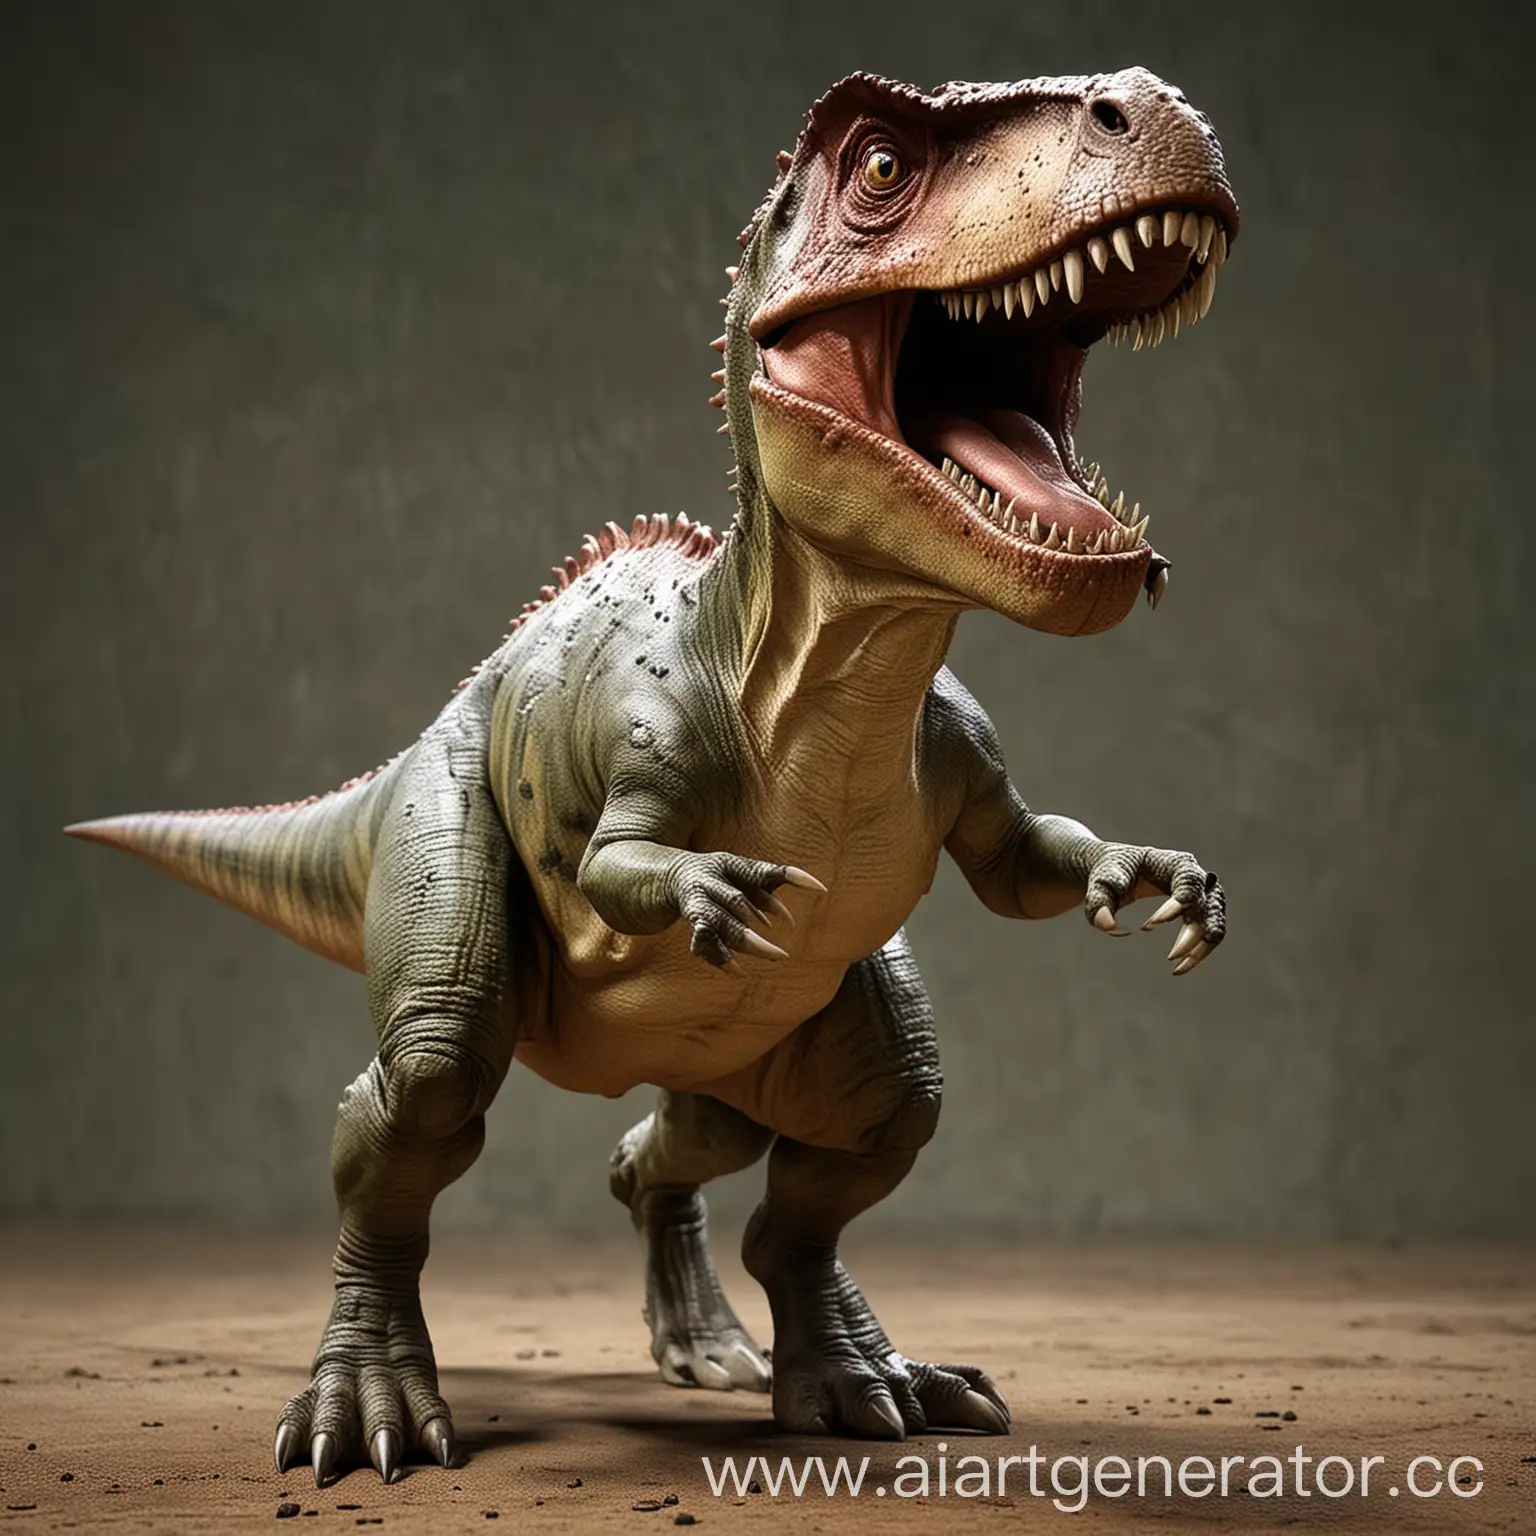 Funny-Tyrannosaurus-Rex-Cartoon-Character-with-a-Comical-Twist